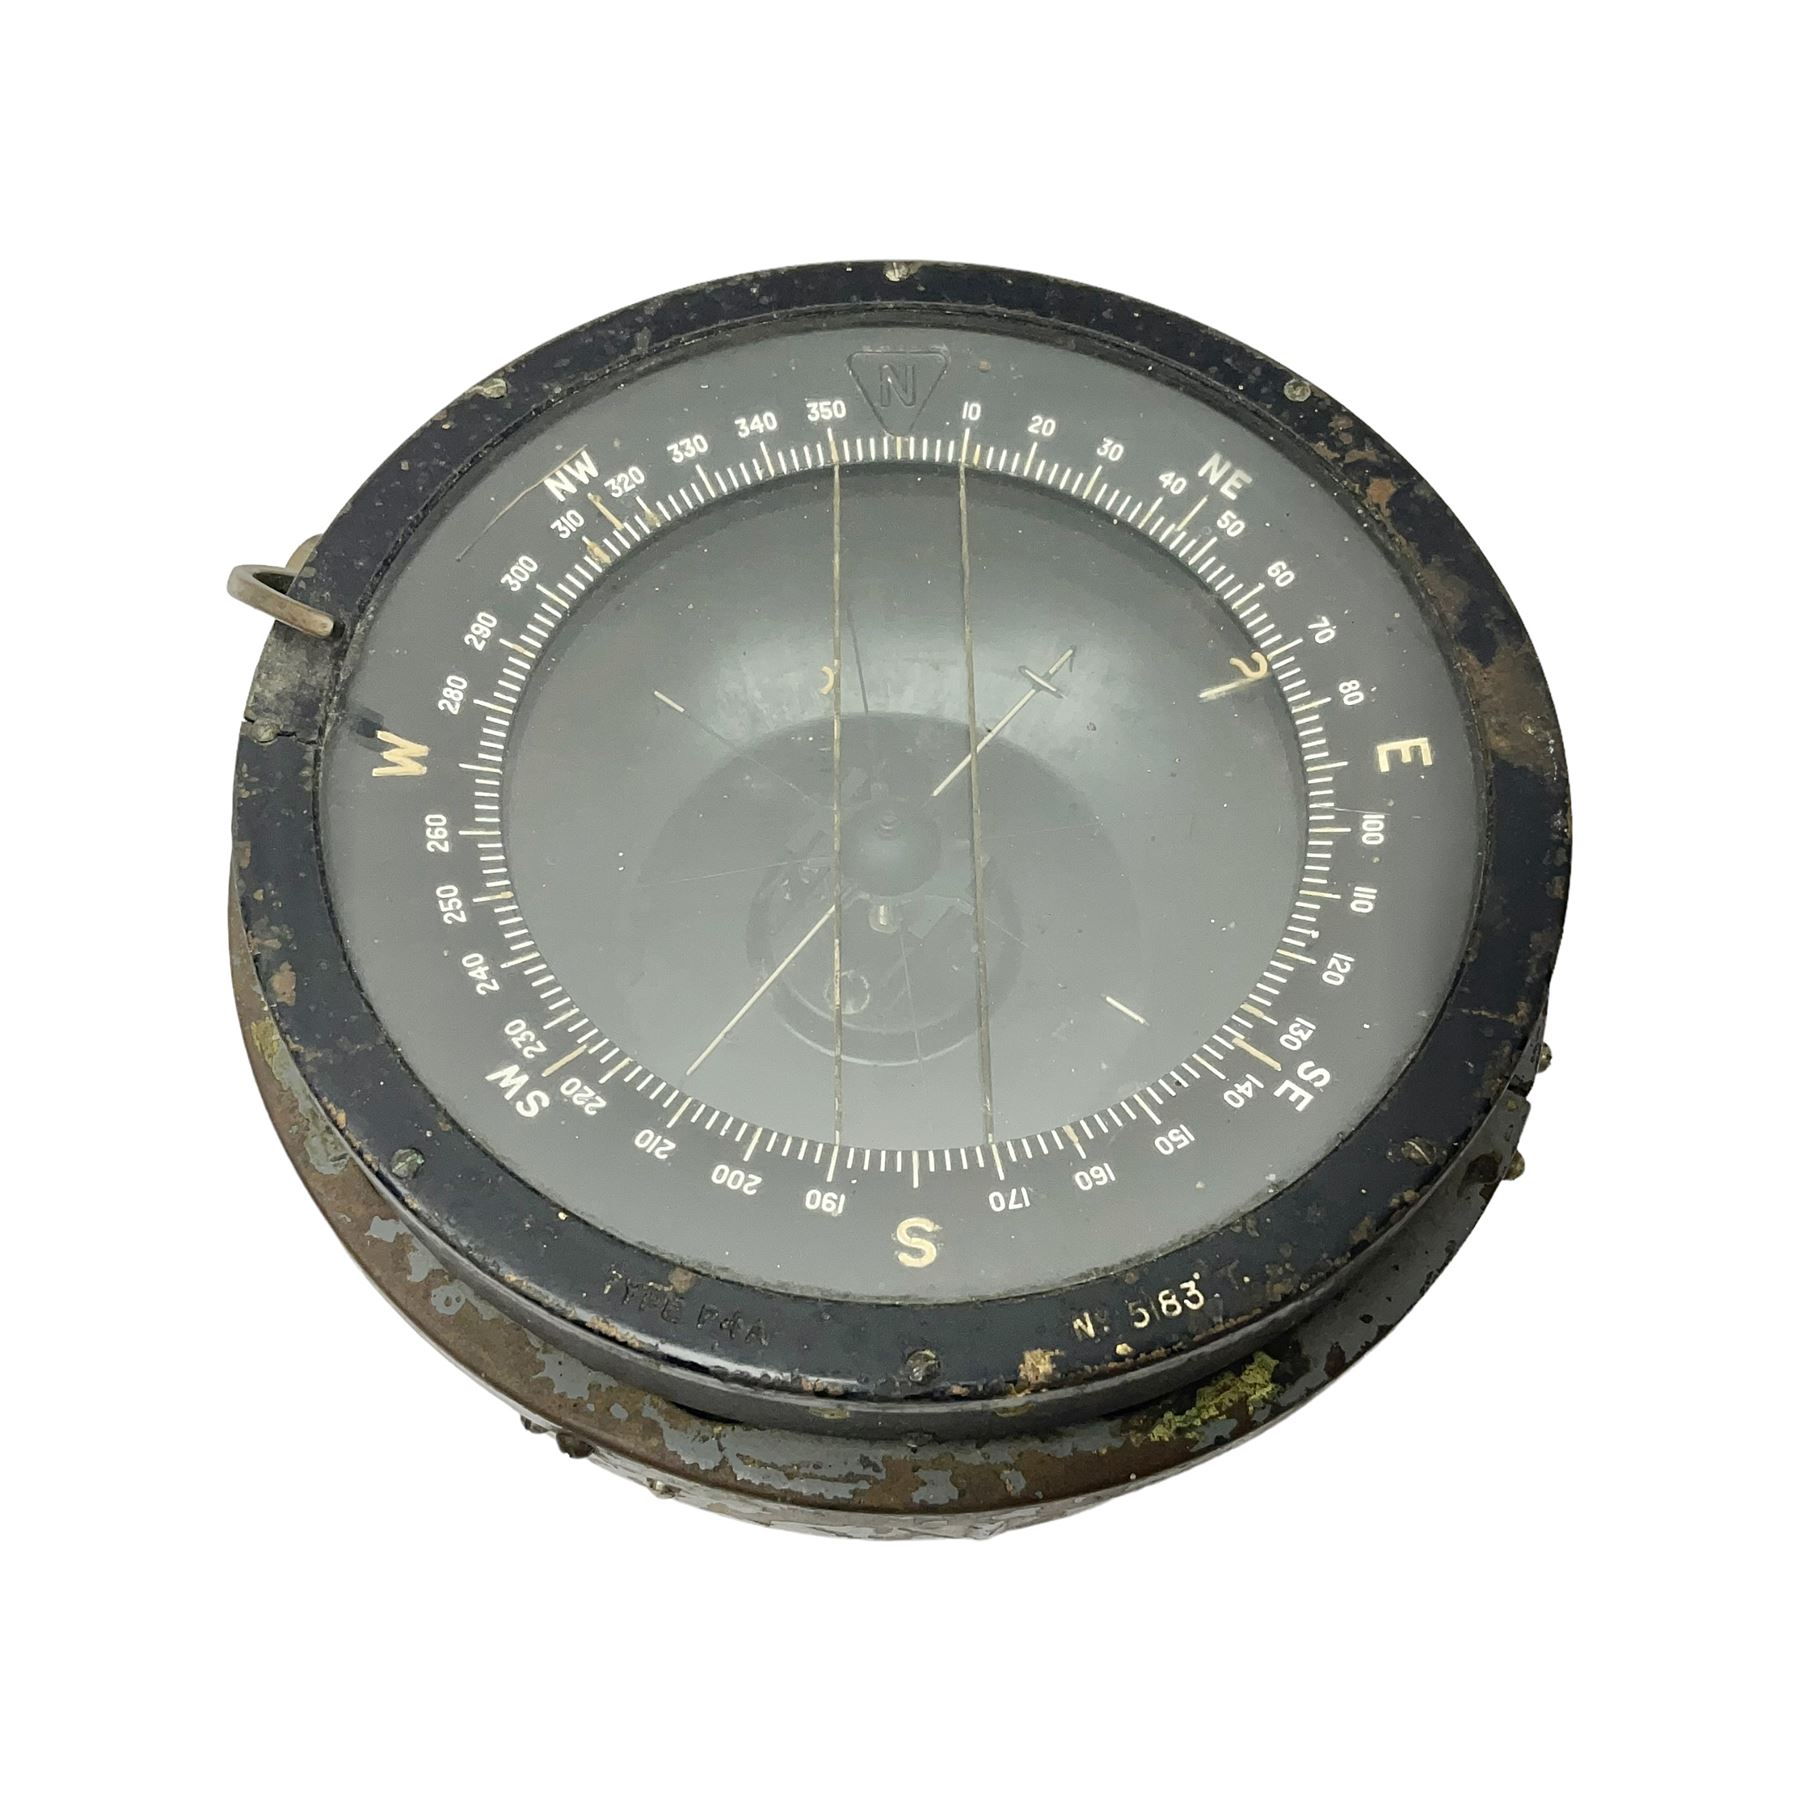 Air Ministry type P8 Compass